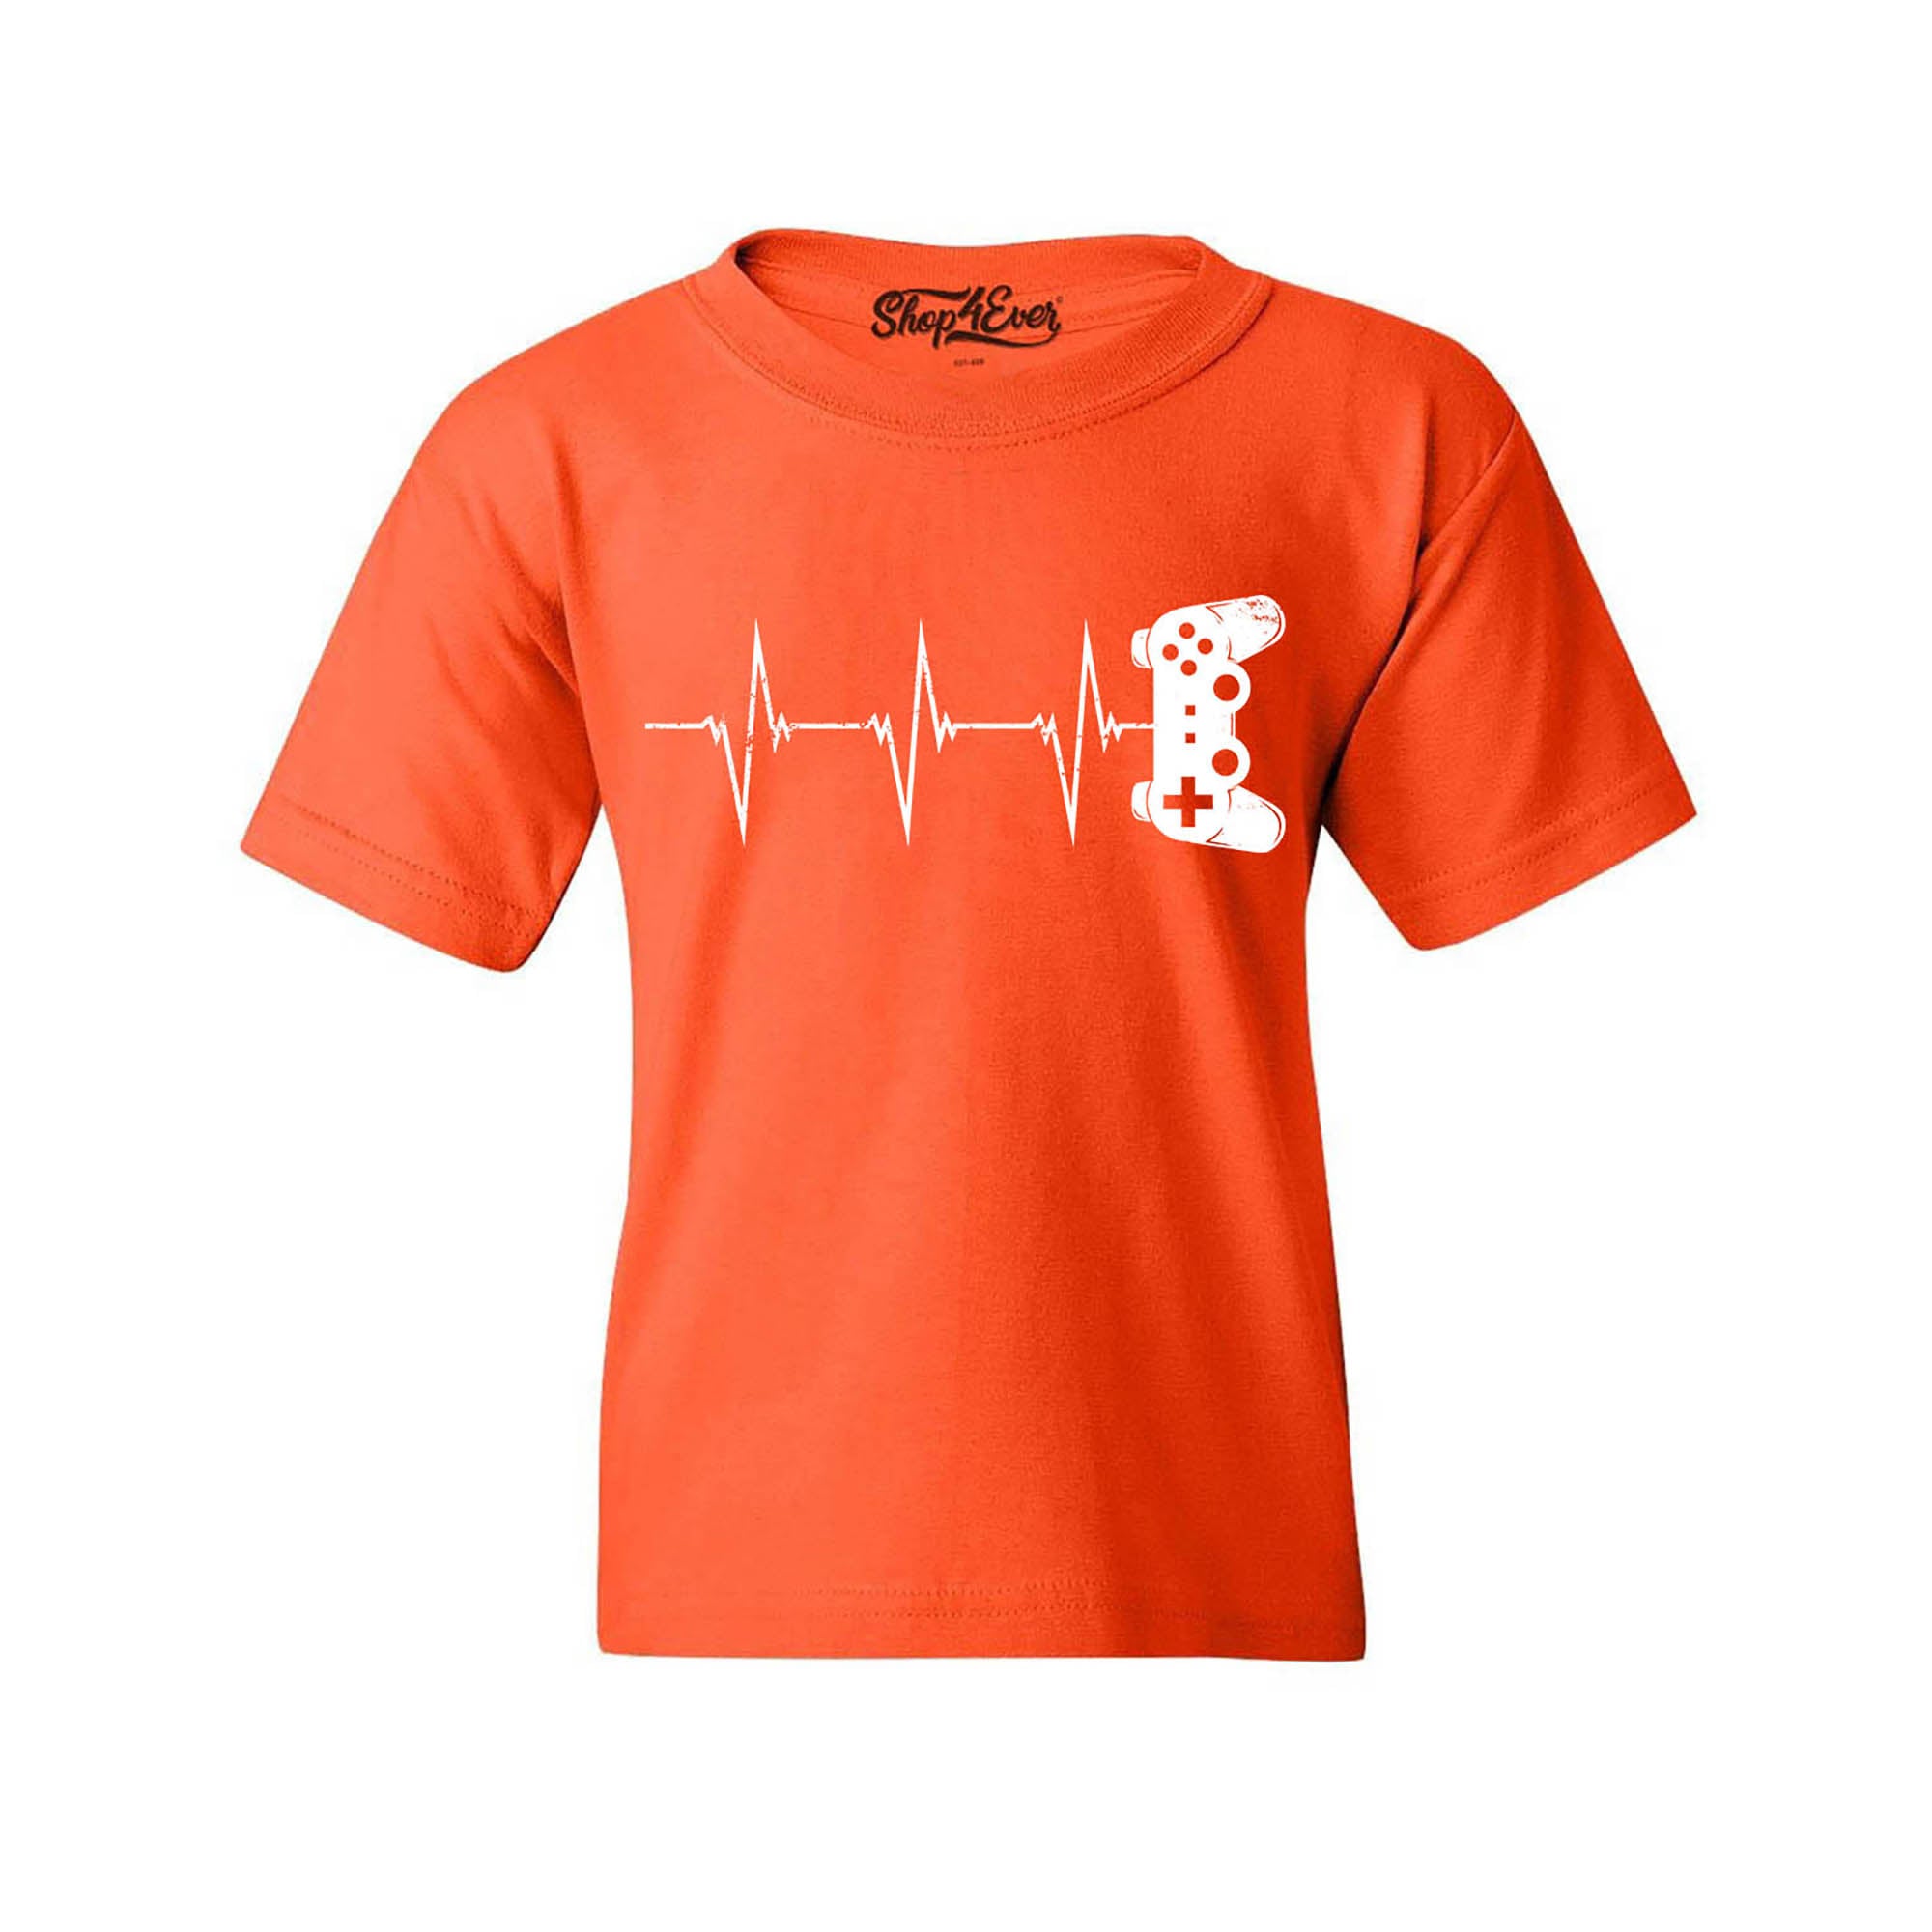 Gamer Heartbeat Boys Kids Child Video Game Youth's T-Shirt